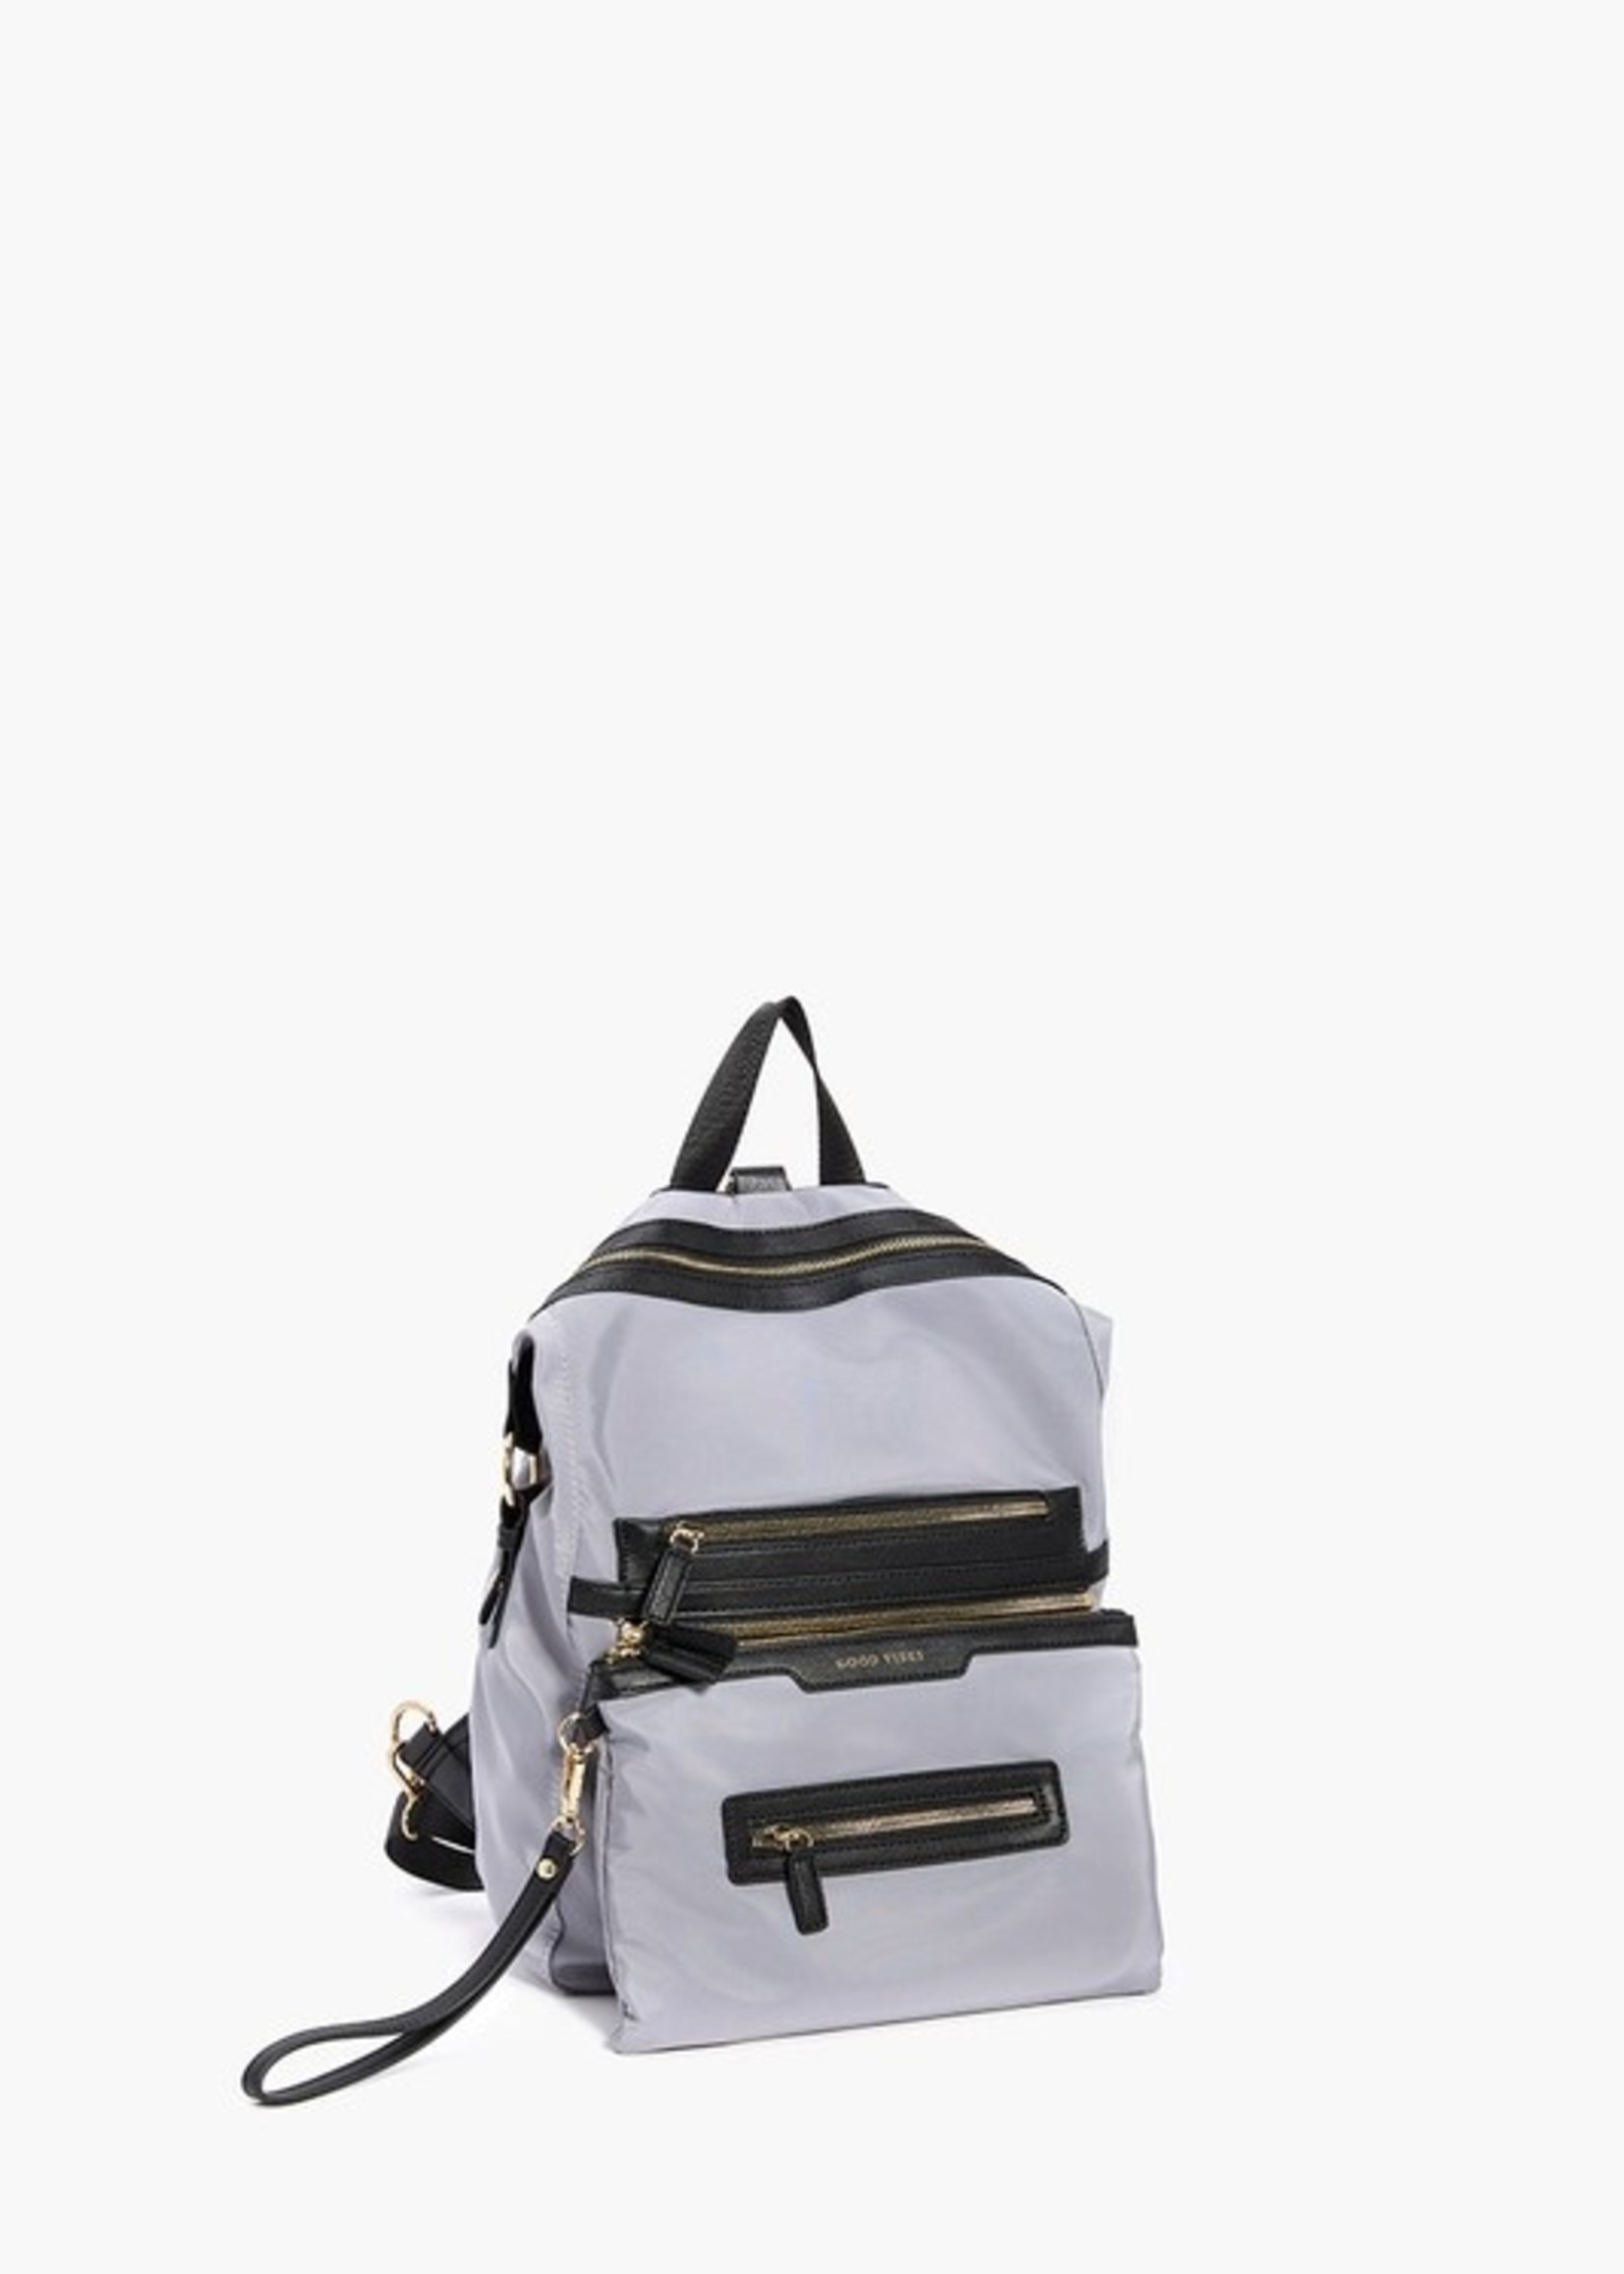 Nylon and leather backpack